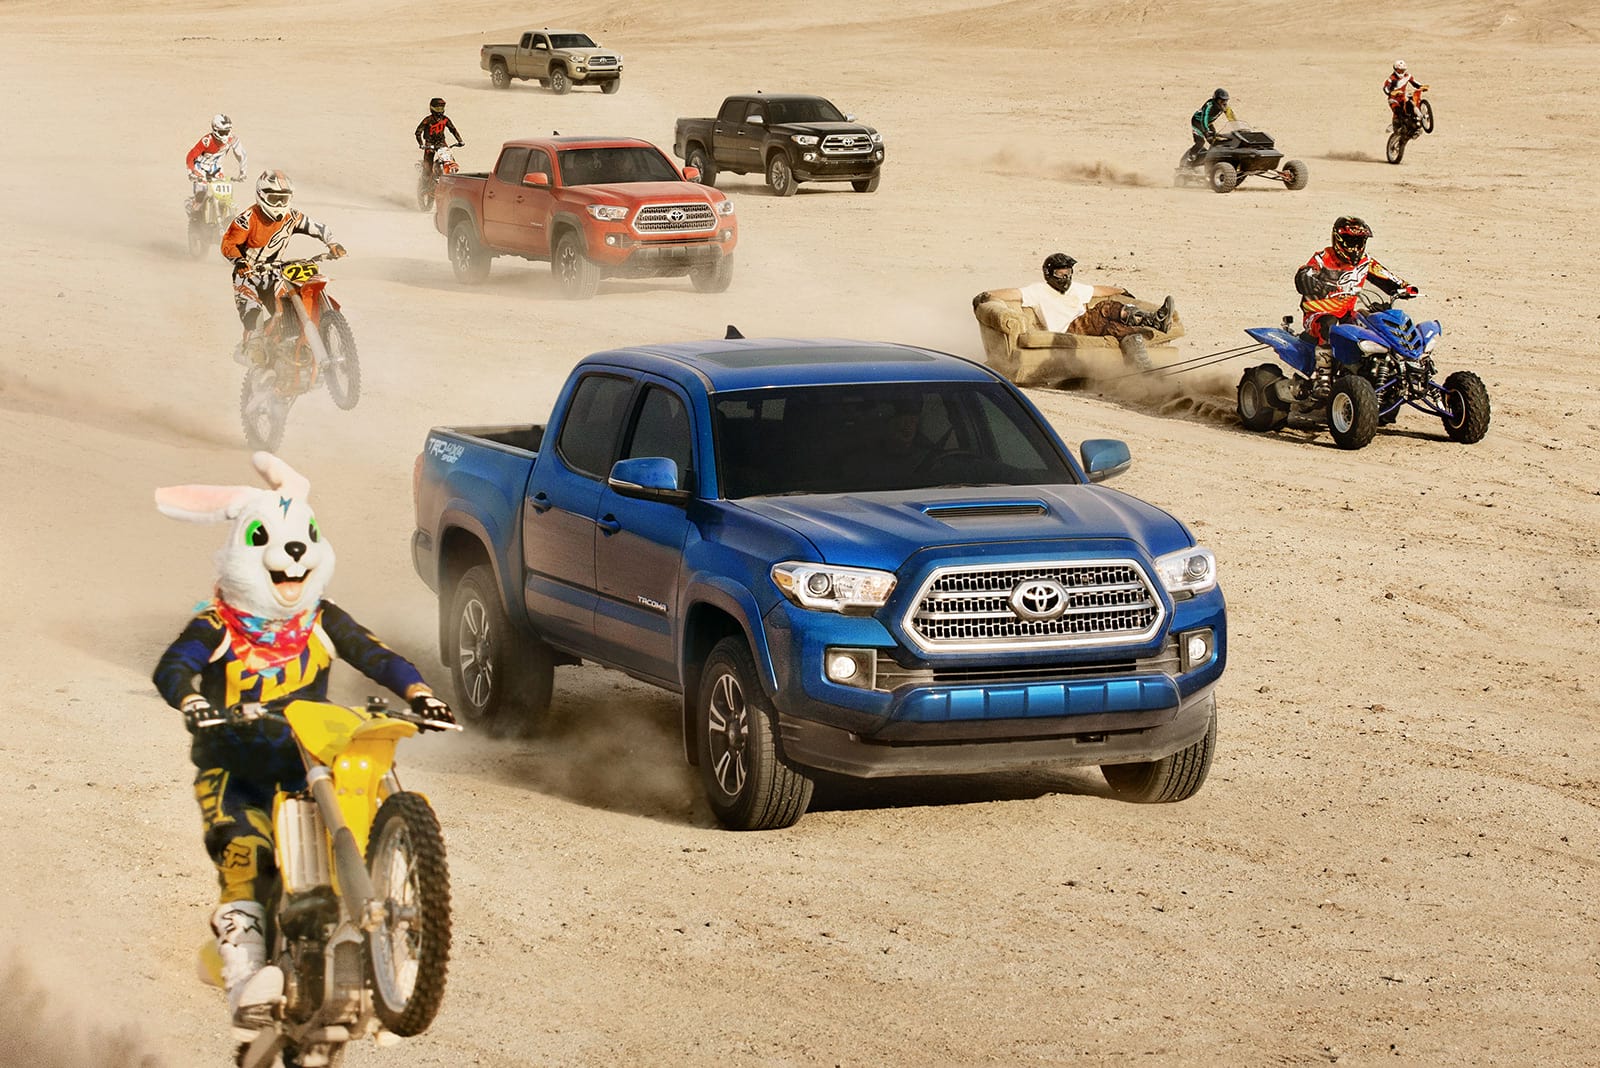 Toyota trucks driving with dirtbikes and ATVs